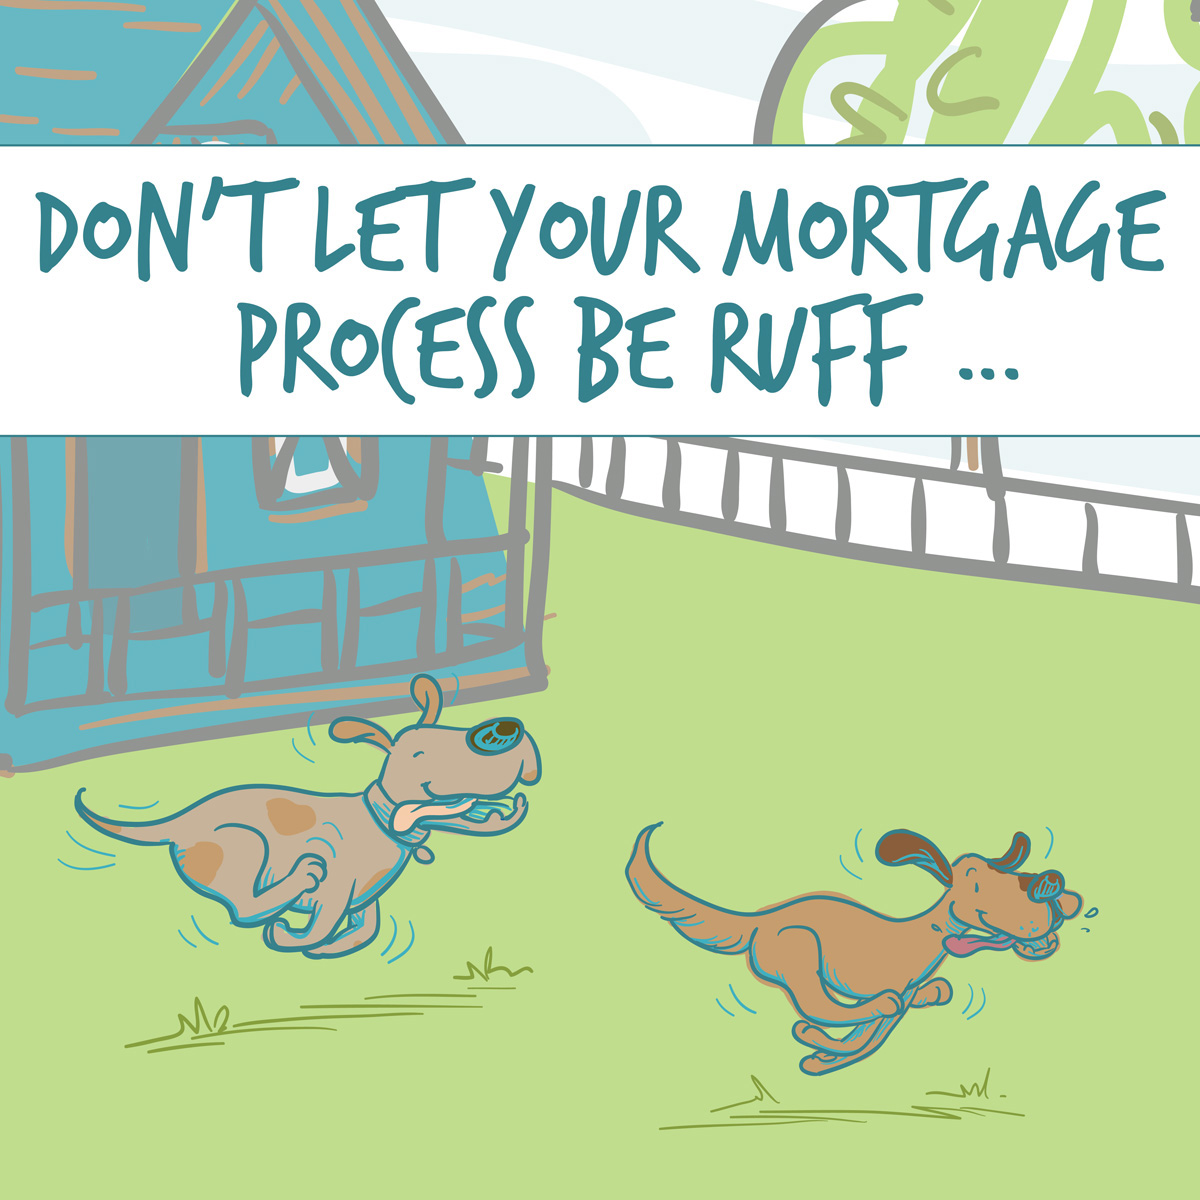 Need more running room for your furry friend? Let us walk you through the pre-approval process so you can get into a new home fast and stress-free! #njmortgage #nymortgage #njrealtor #nyrealtor